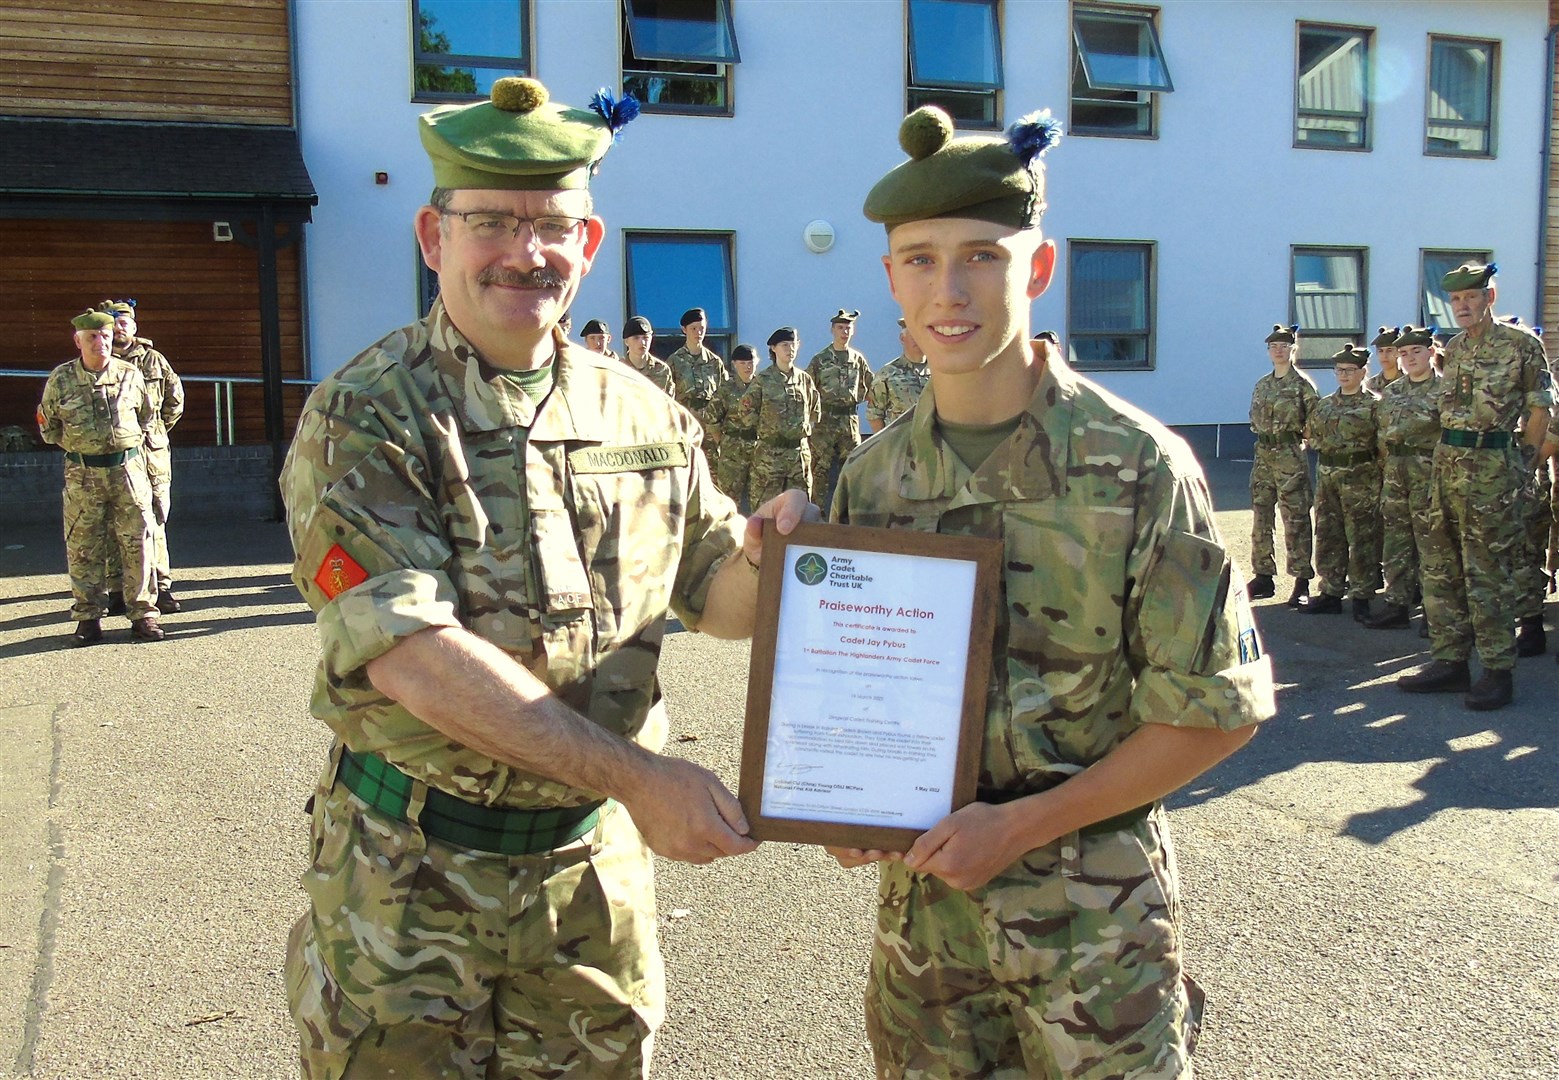 Cdt Jay Pybus (right) being presented with his ACCT Praiseworthy First Aid Certificate by the Battalion's Commandant Col Mike MacDonald.